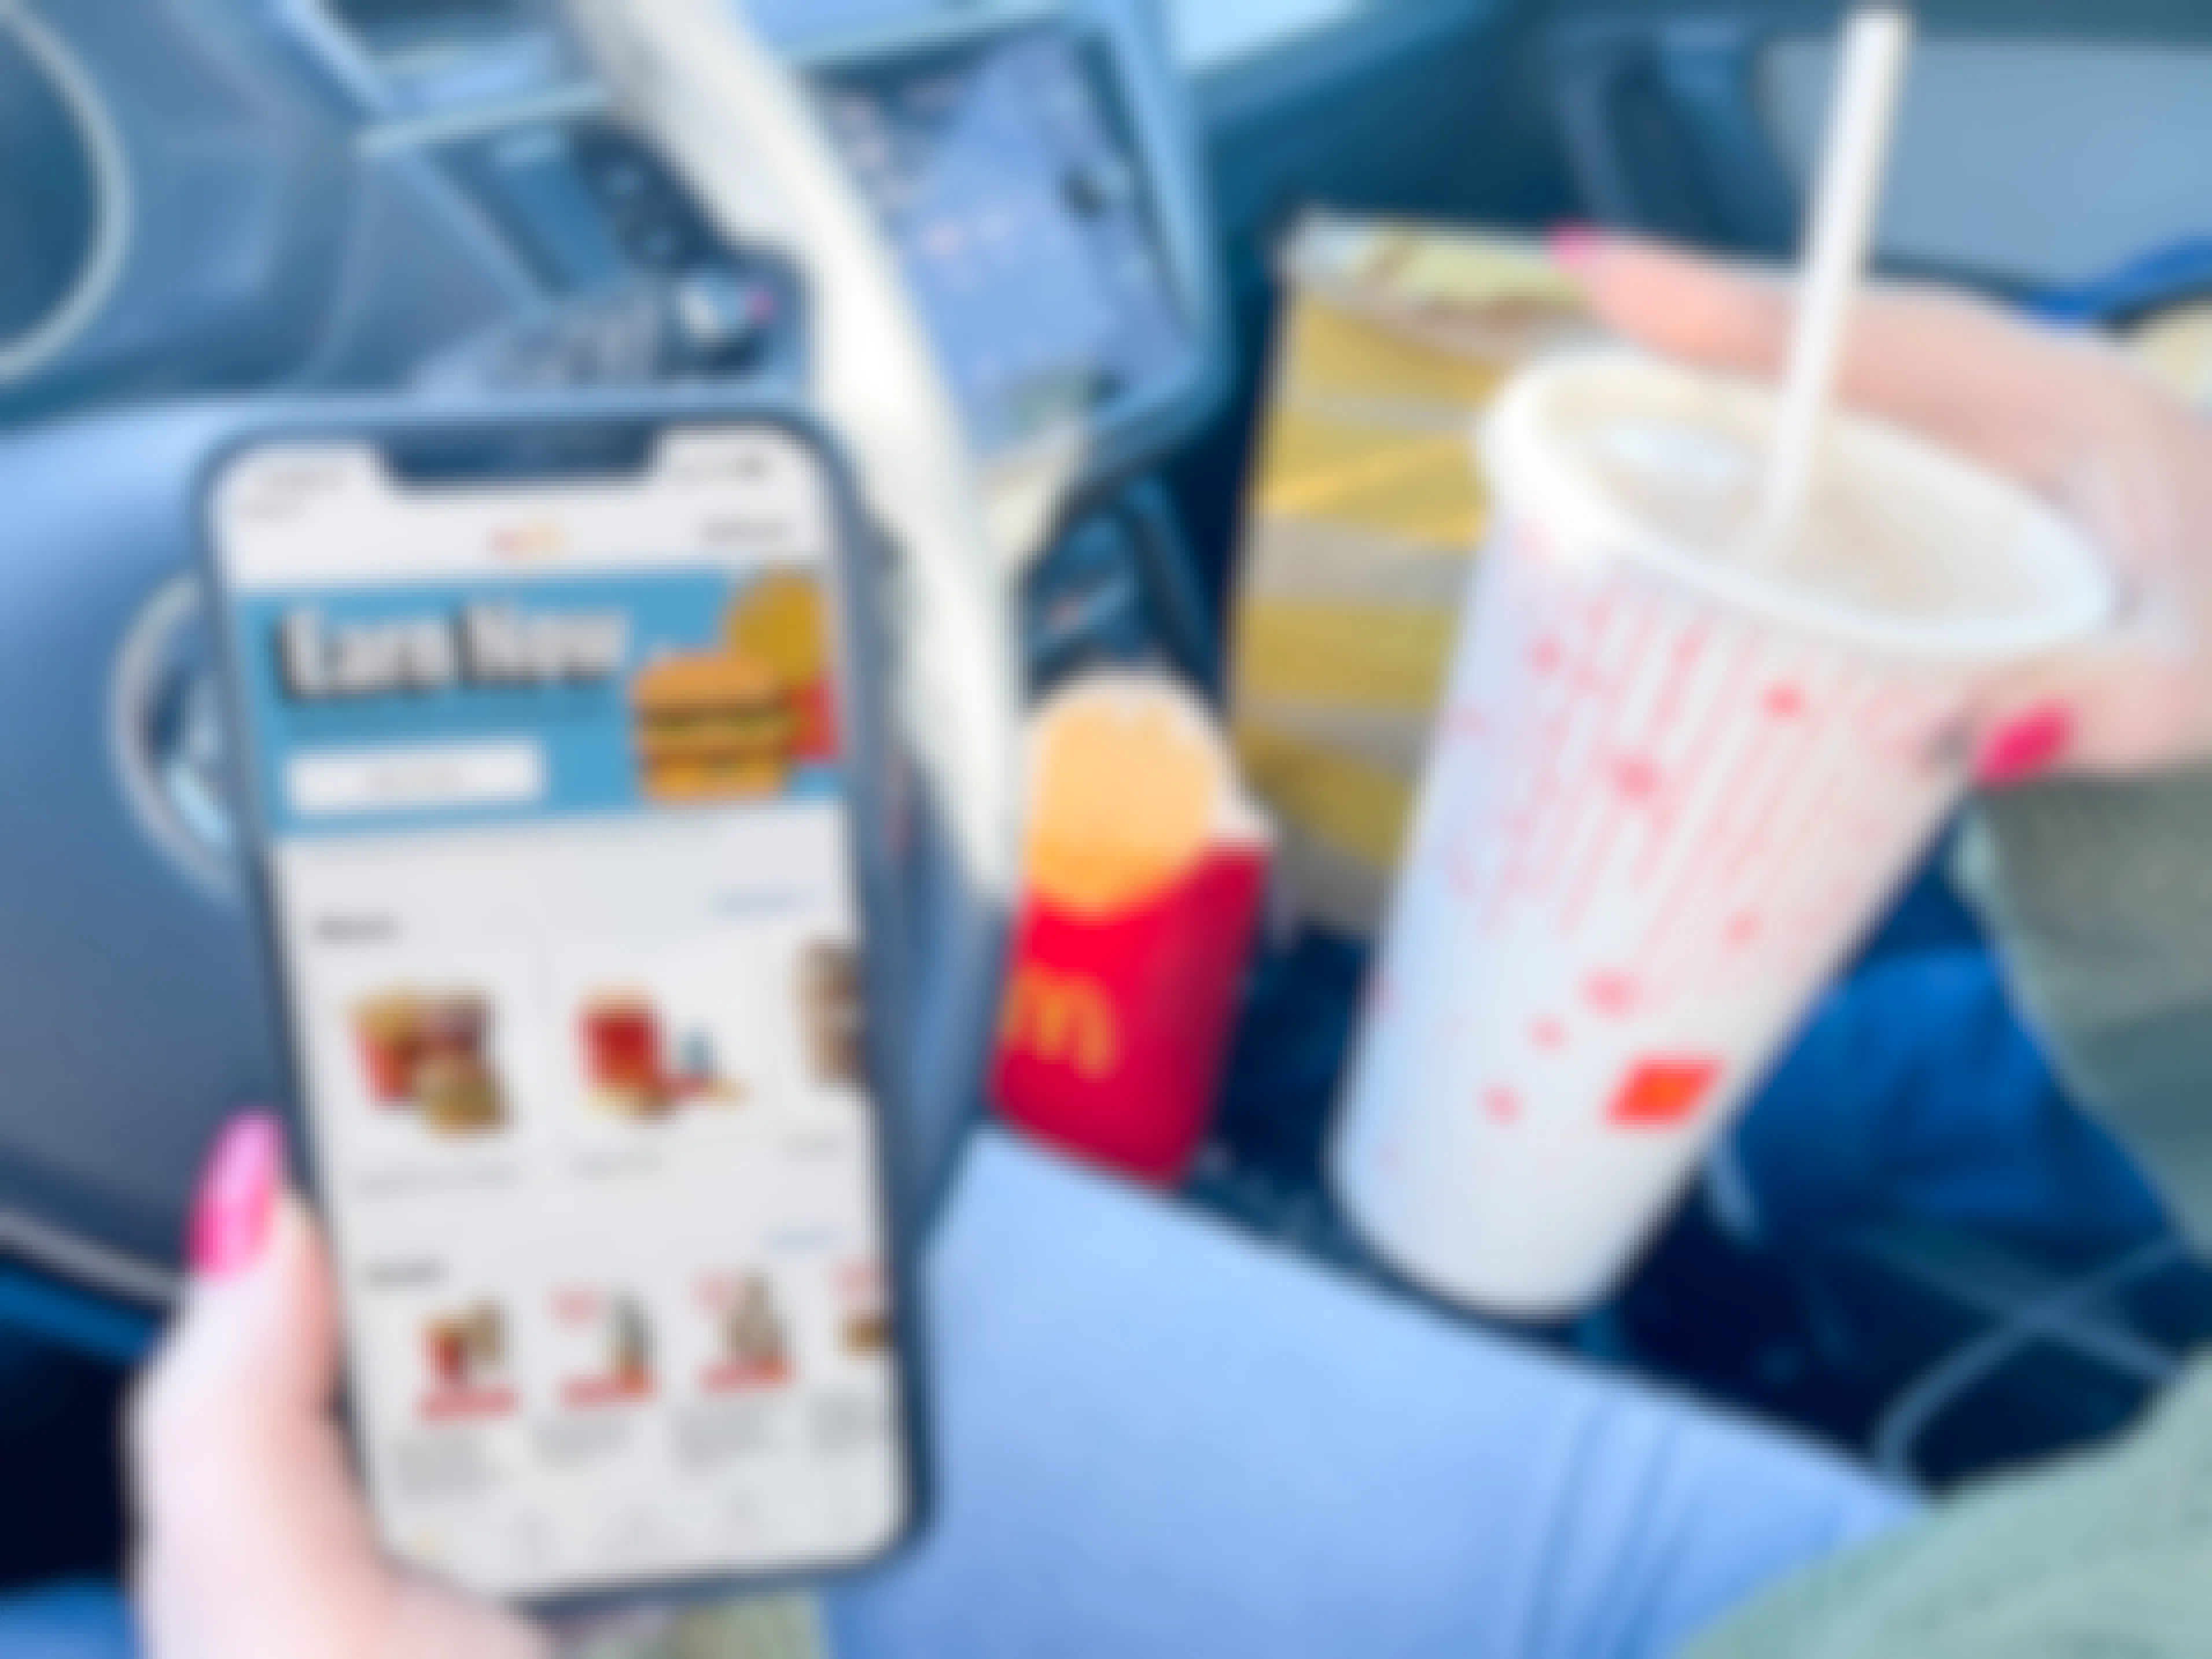 Free McDonalds Year-Round: When To Get the Best Deals & Freebies